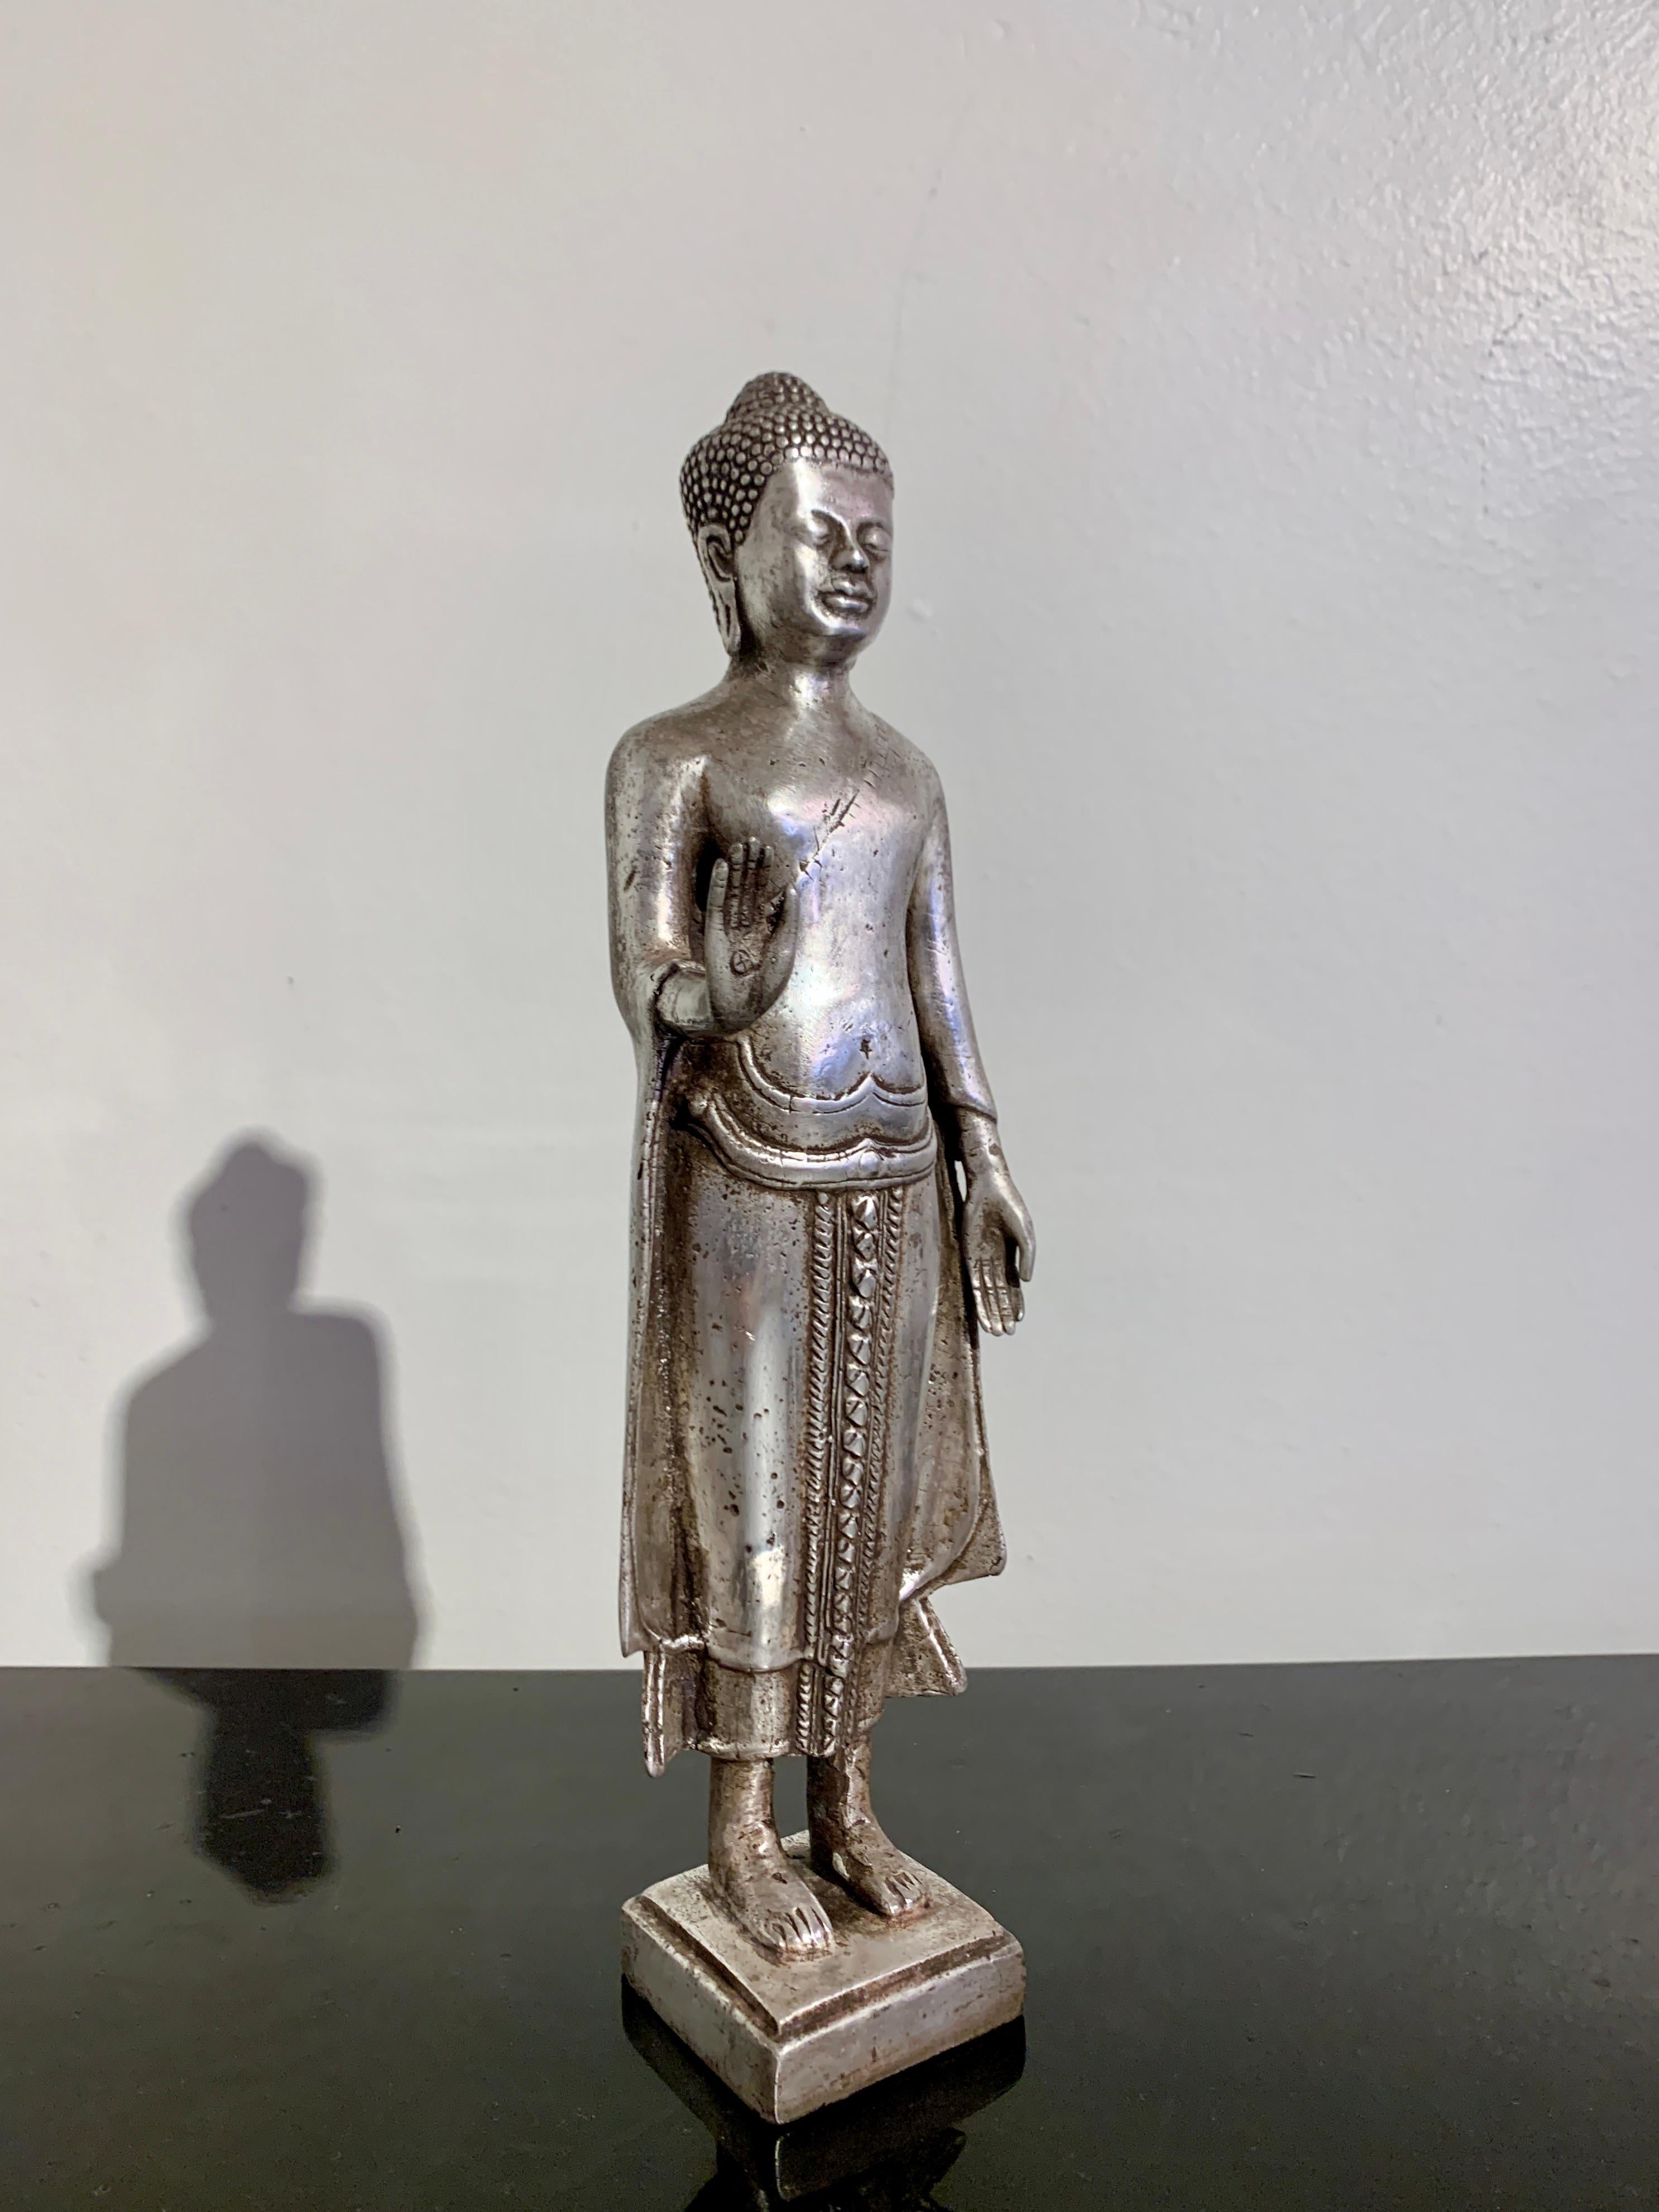 An impressive and gracious Thai cast silver alloy standing Buddha, mid 20th century, Thailand.

The Buddha stands upright upon a small square plinth. He is dressed in layered robes, including a dhoti covering his legs, and a sanghati wrapped